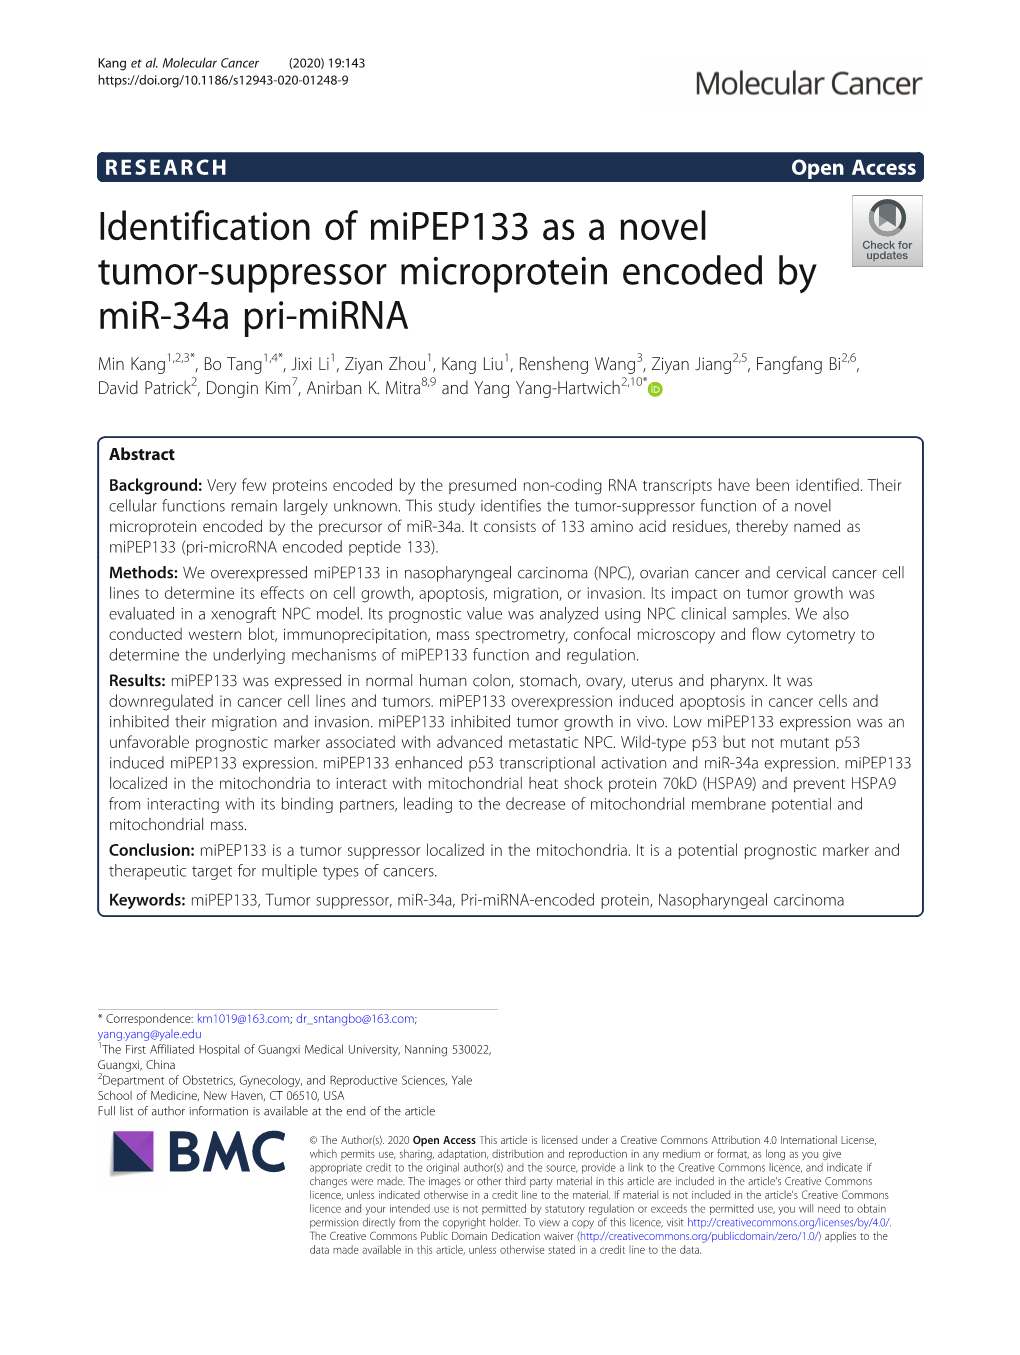 Identification of Mipep133 As a Novel Tumor-Suppressor Microprotein